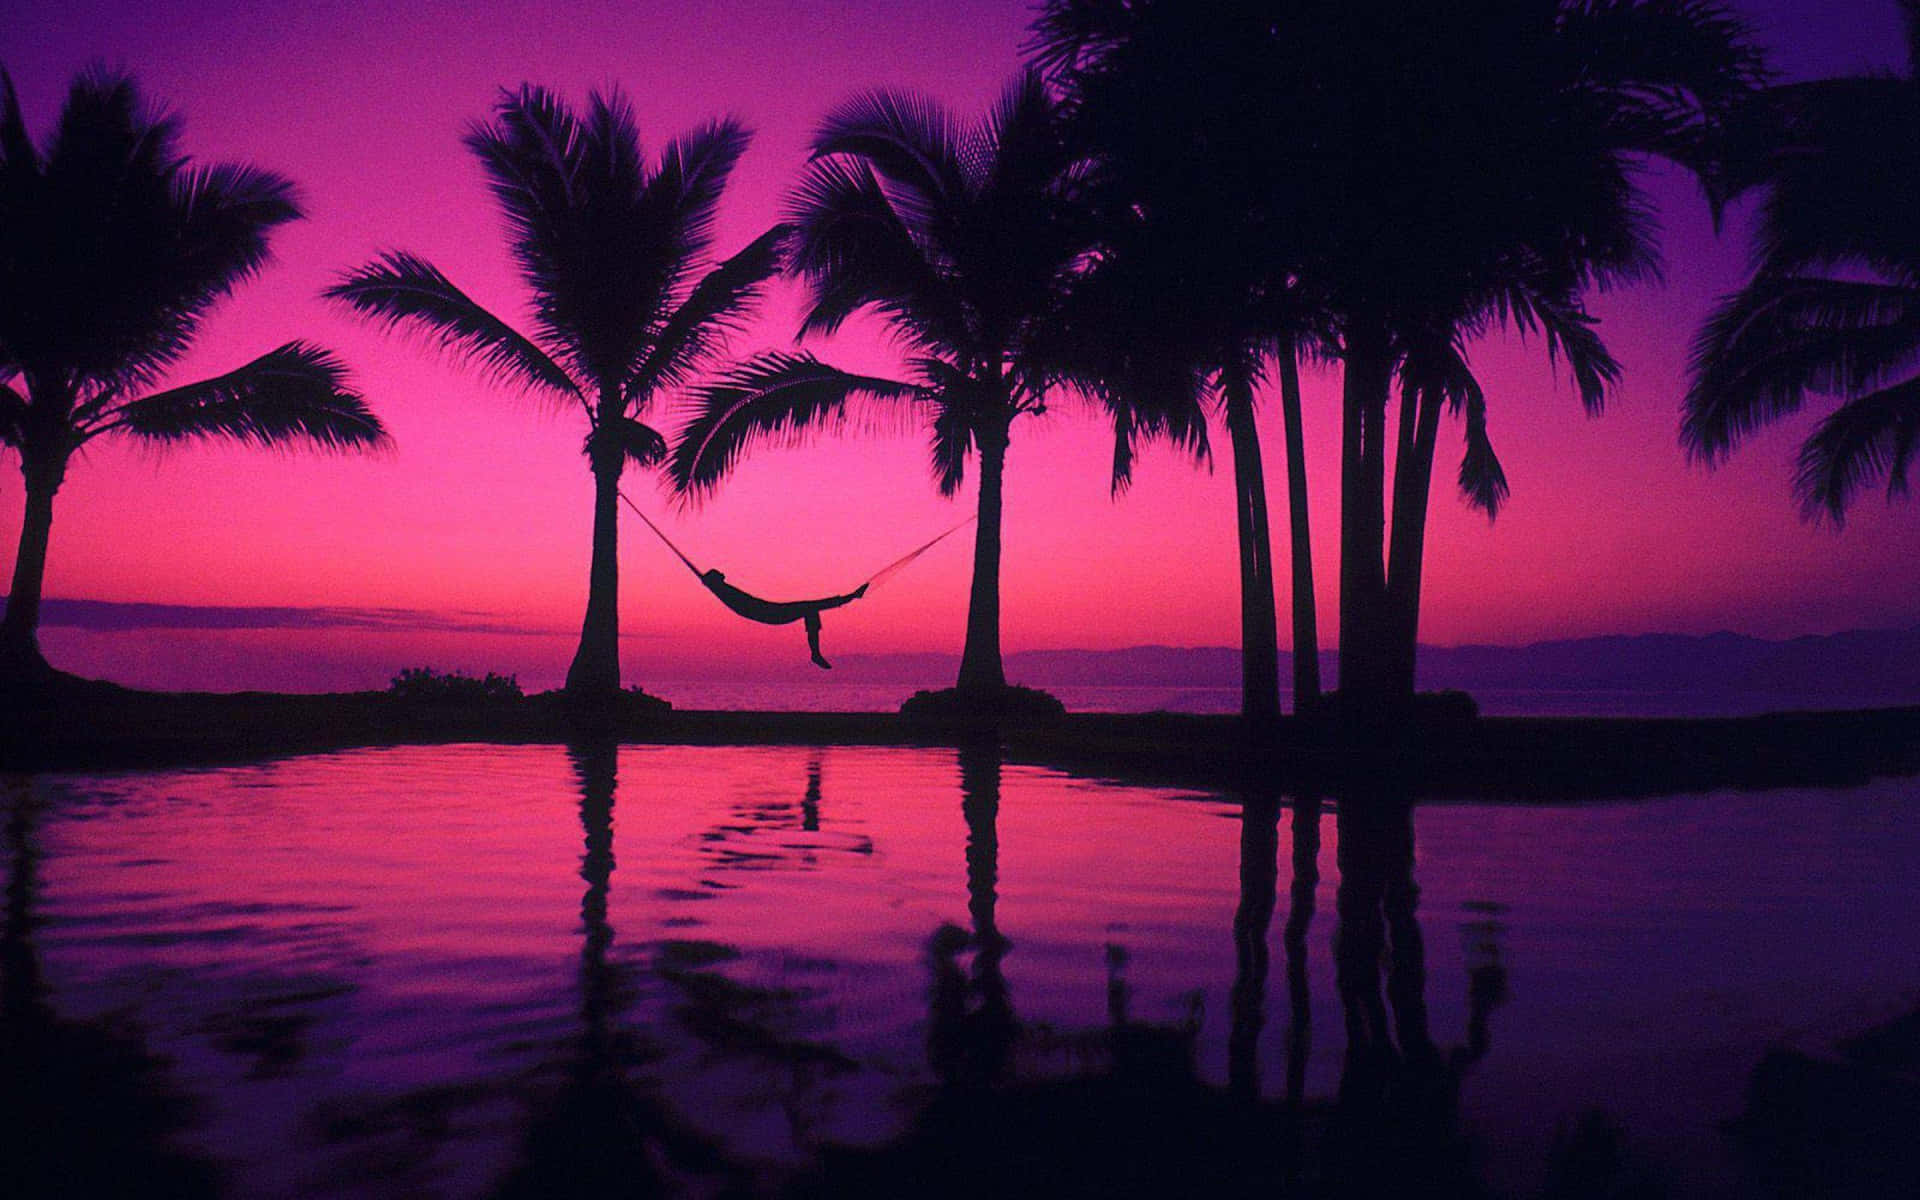 Taking in the magical view of a pink beach sunset. Wallpaper